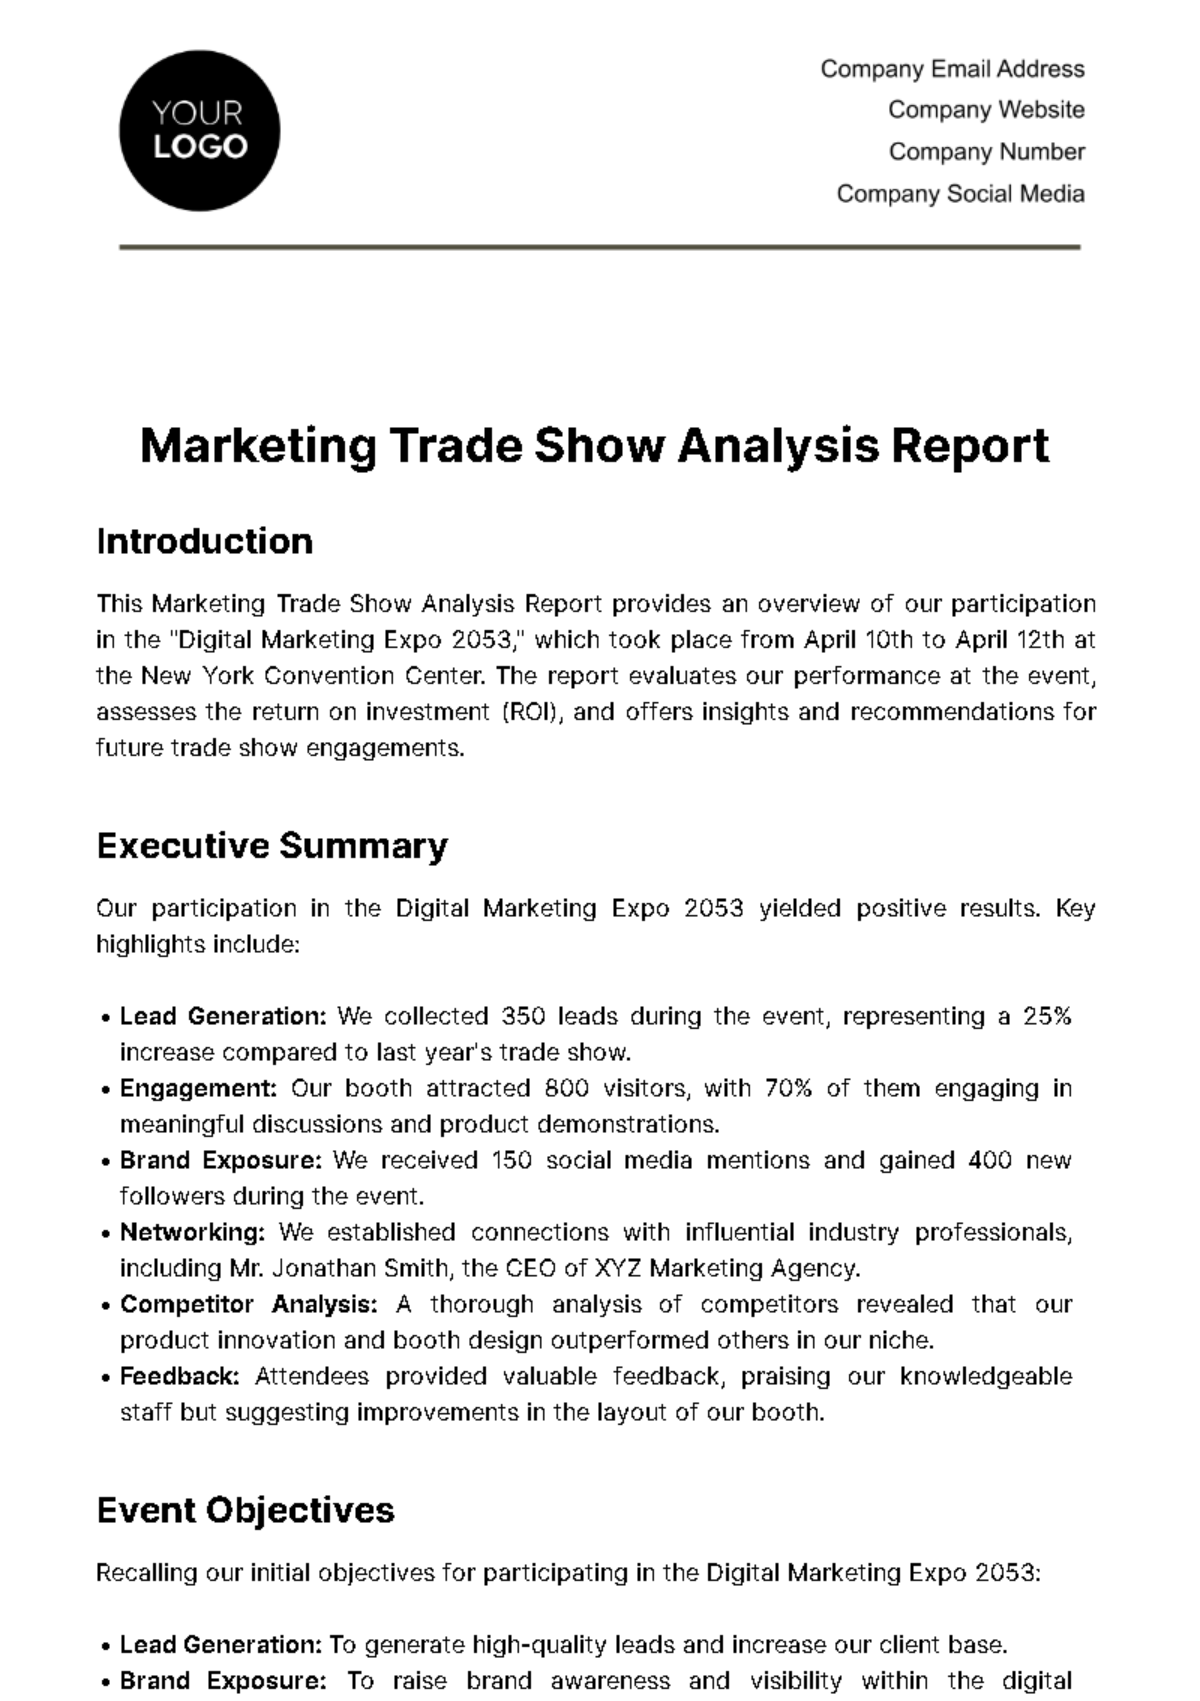 Free Marketing Trade Show Analysis Report Template